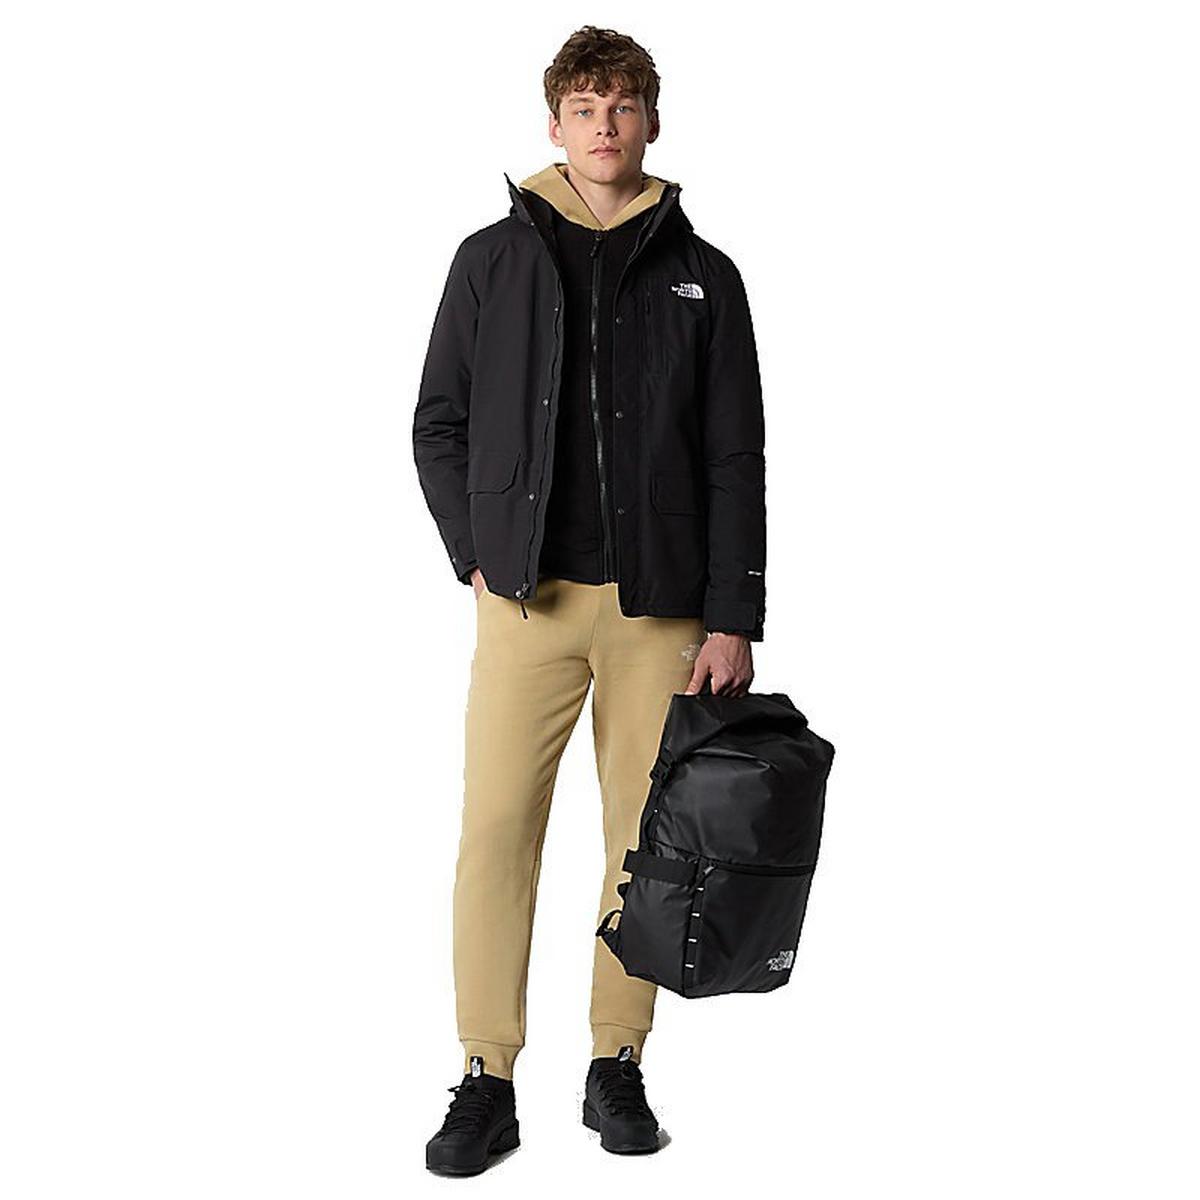 The North Face Men's Pinecroft Triclimate Jacket - Black